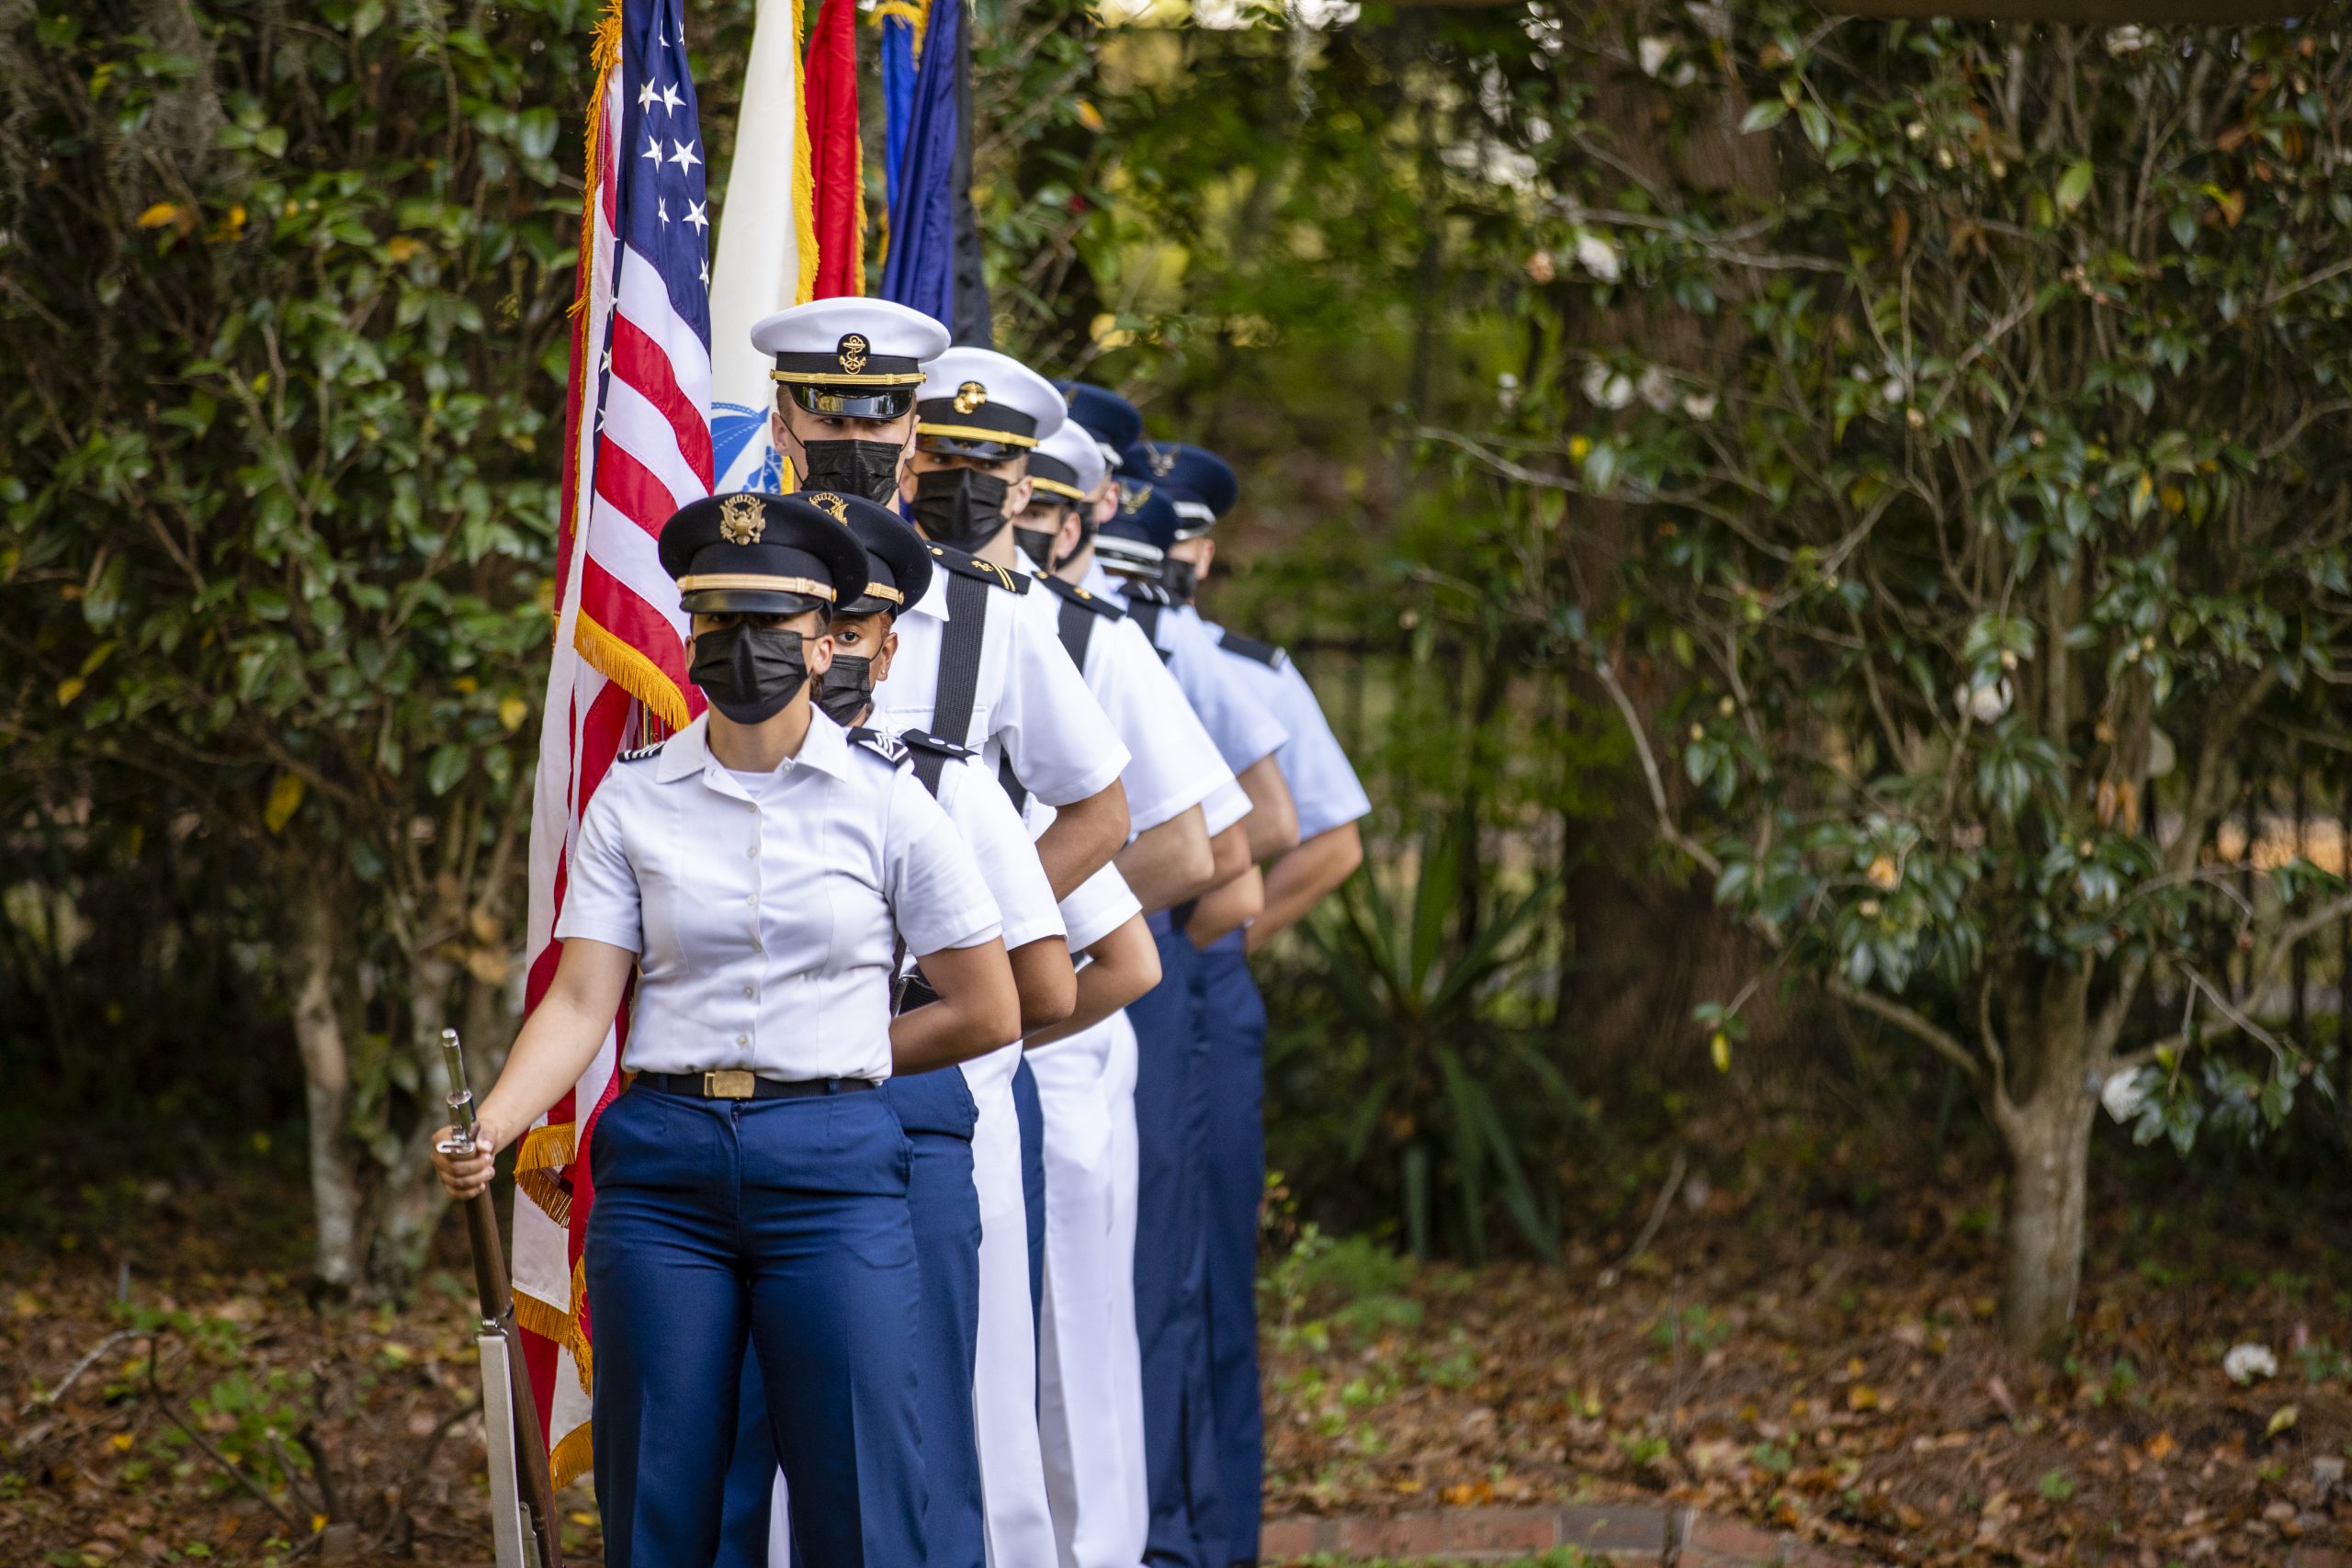 UF color guard lines up at an event.